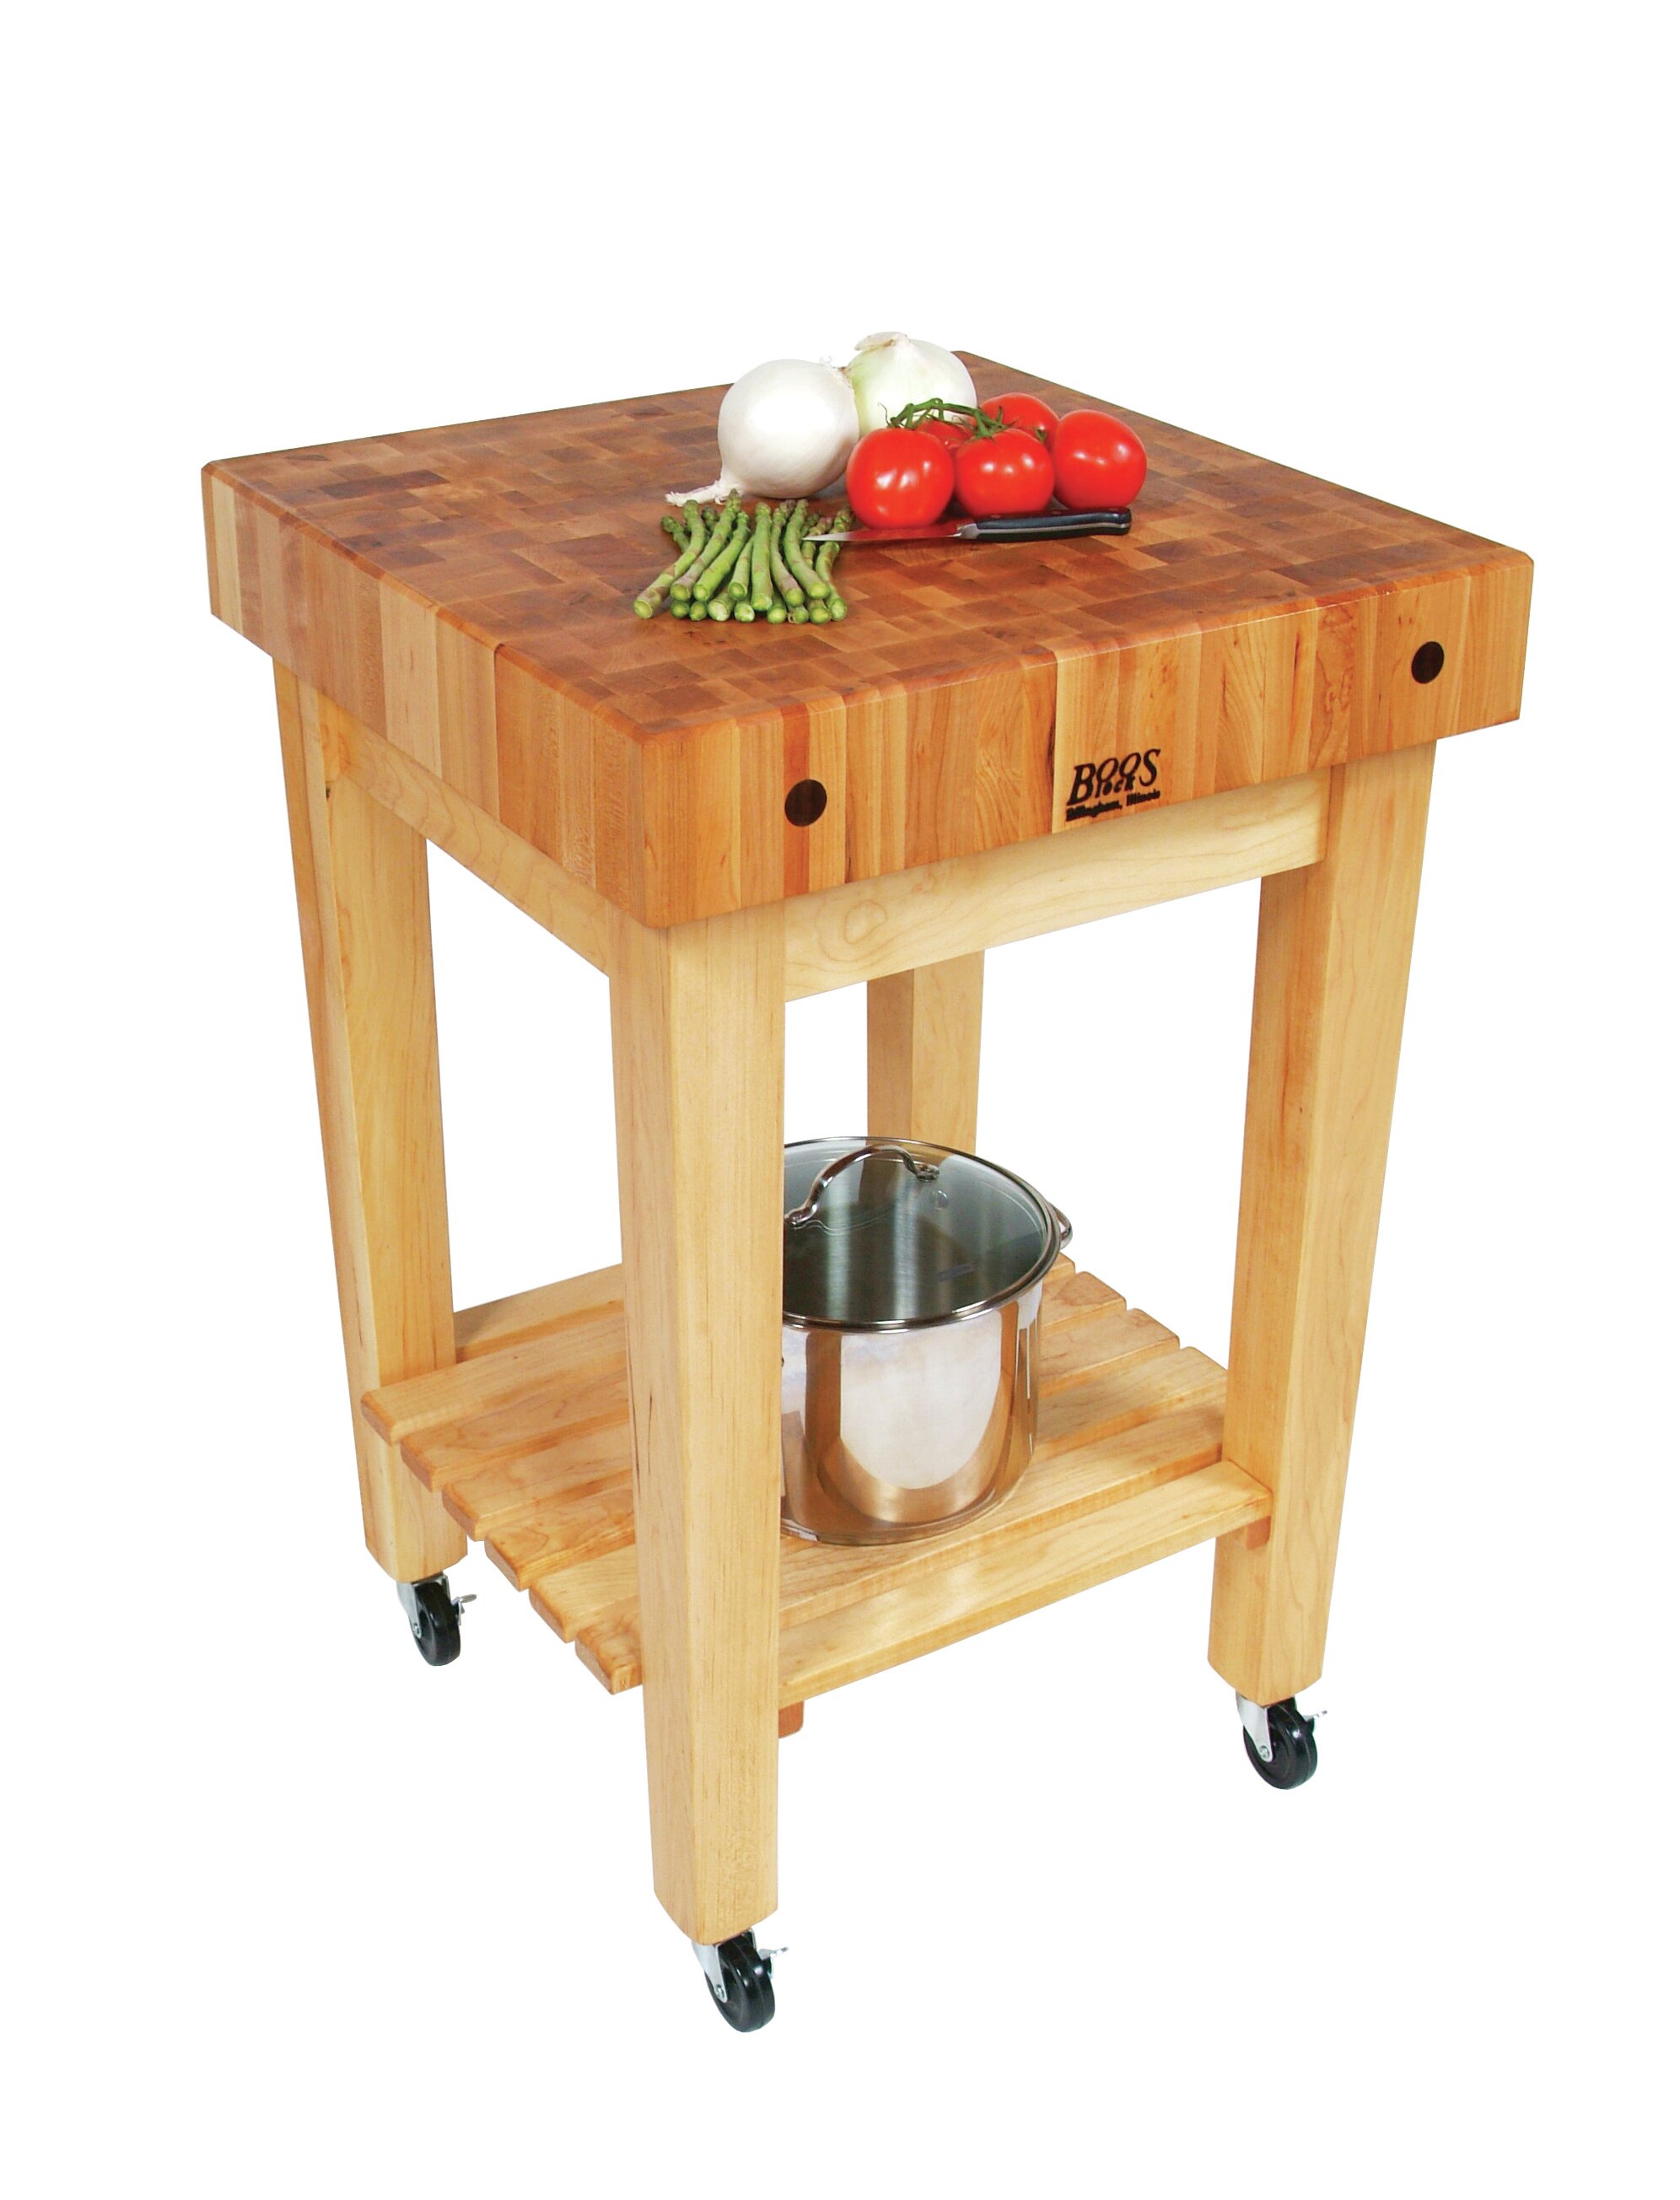 1 Included Shelves Warm Cherry John Boos American Heritage Chef's Block Prep Table with Butcher Block Top Base Finish 